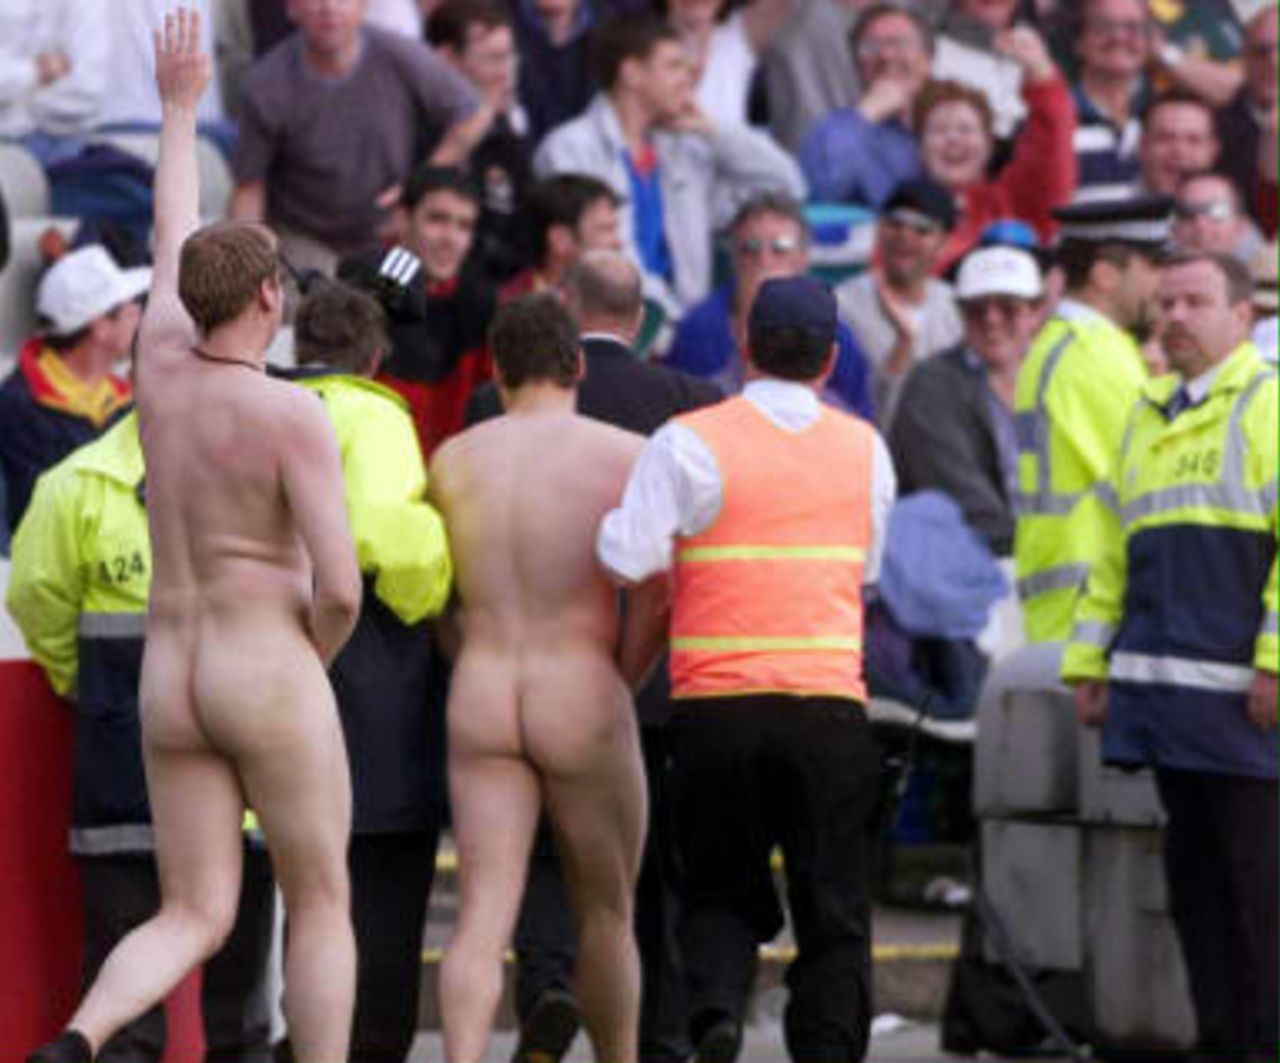 Two streakers are escorted from the pitch after disrupting play during the Super Six match between South Africa and New Zealand in the Cricket World Cup at Edgbaston, Birmingham.